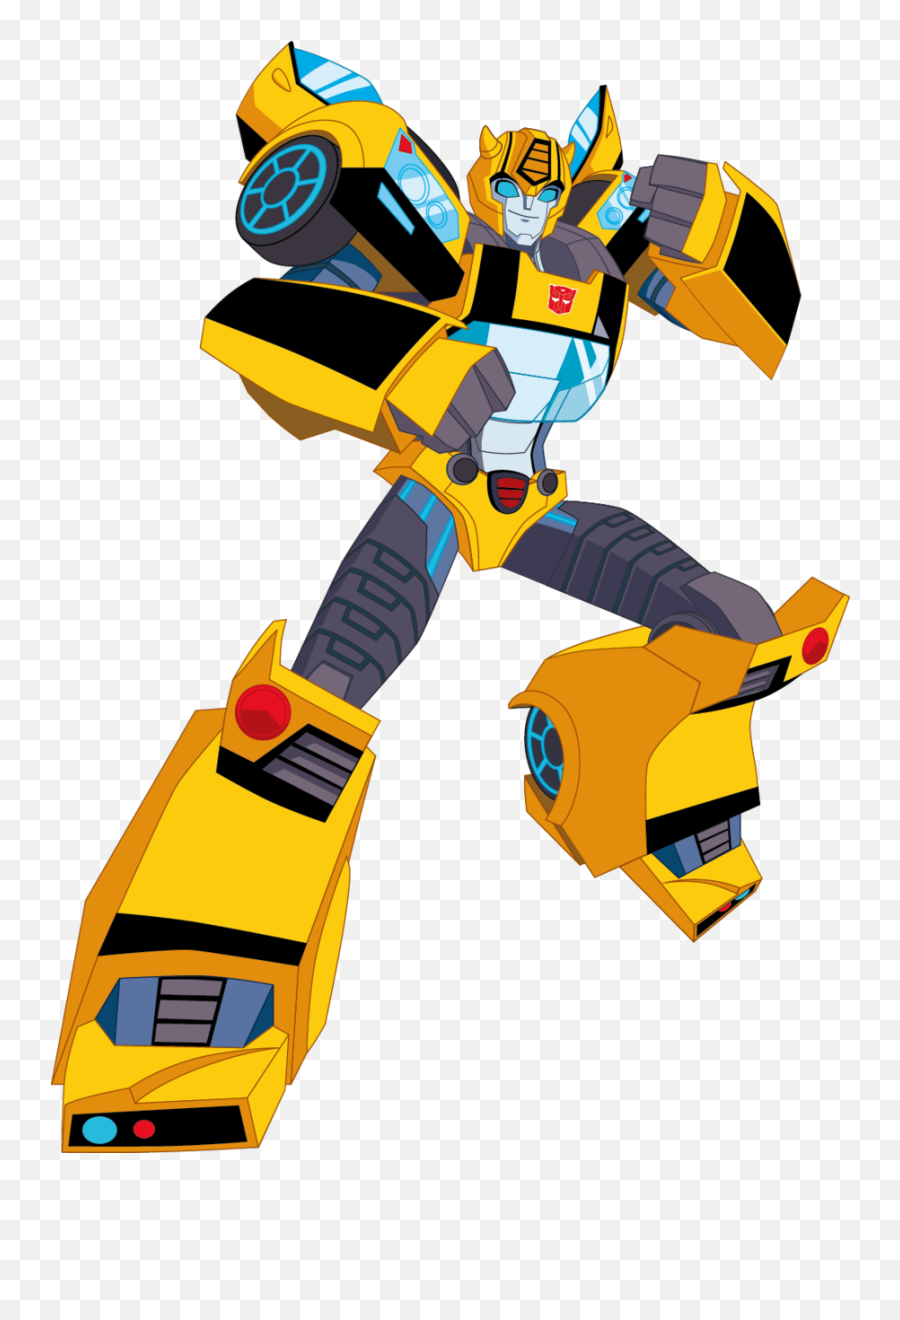 Download Hd Bumblebee - Transformers Cyberverse Bumblebee Transformers Cyberverse Bumblebee Png,Bumblebee Png